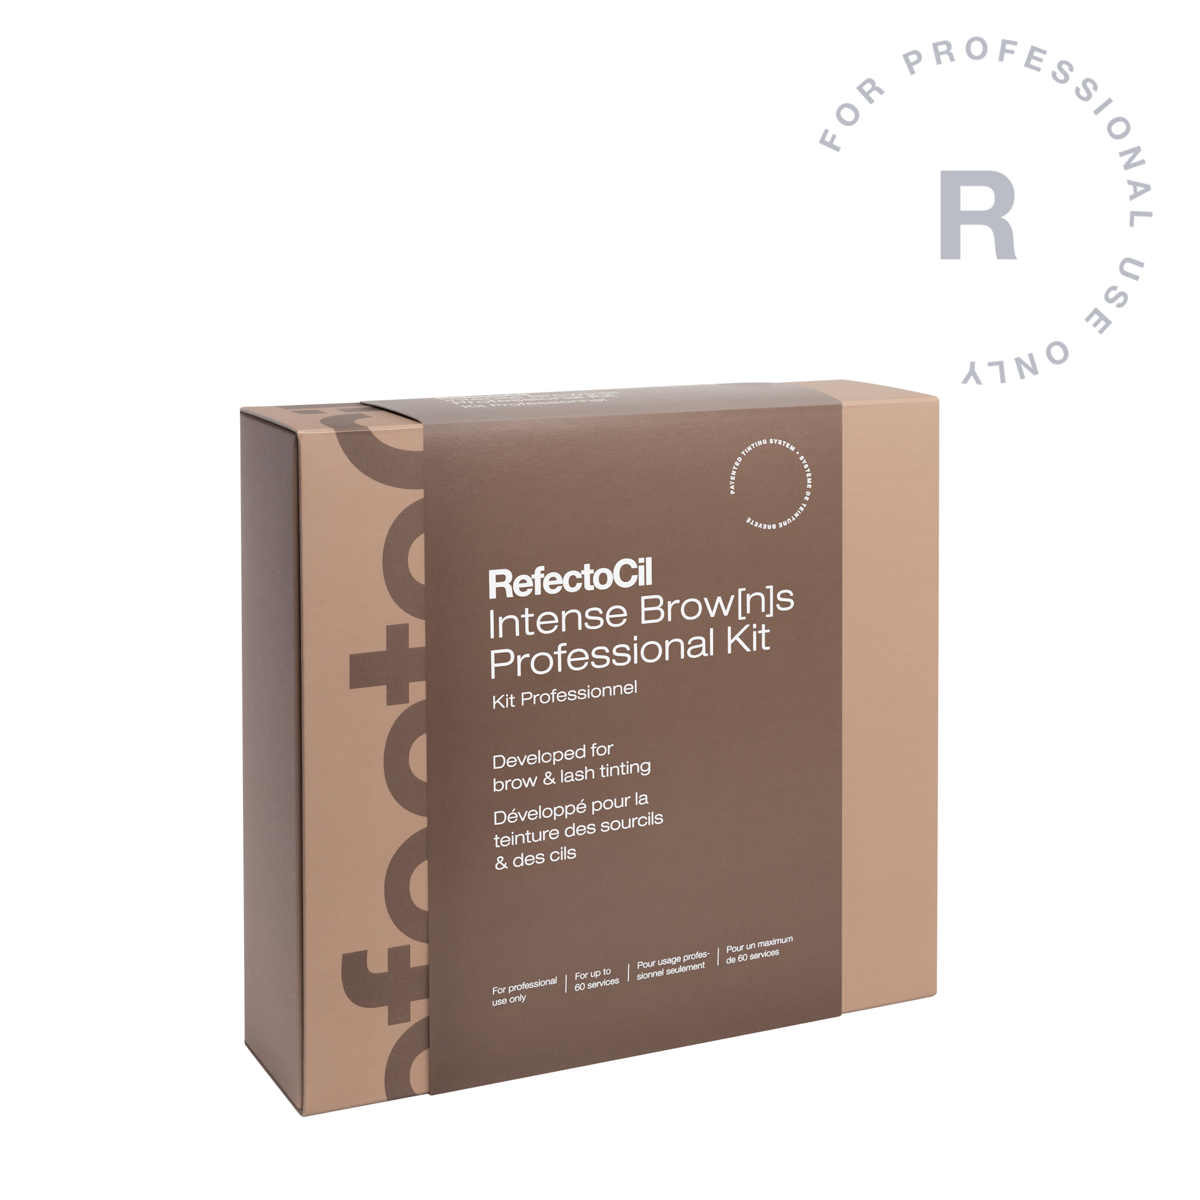 RefectoCil Intense Brow[n]s Kit - Creata Beauty - Professional Beauty Products